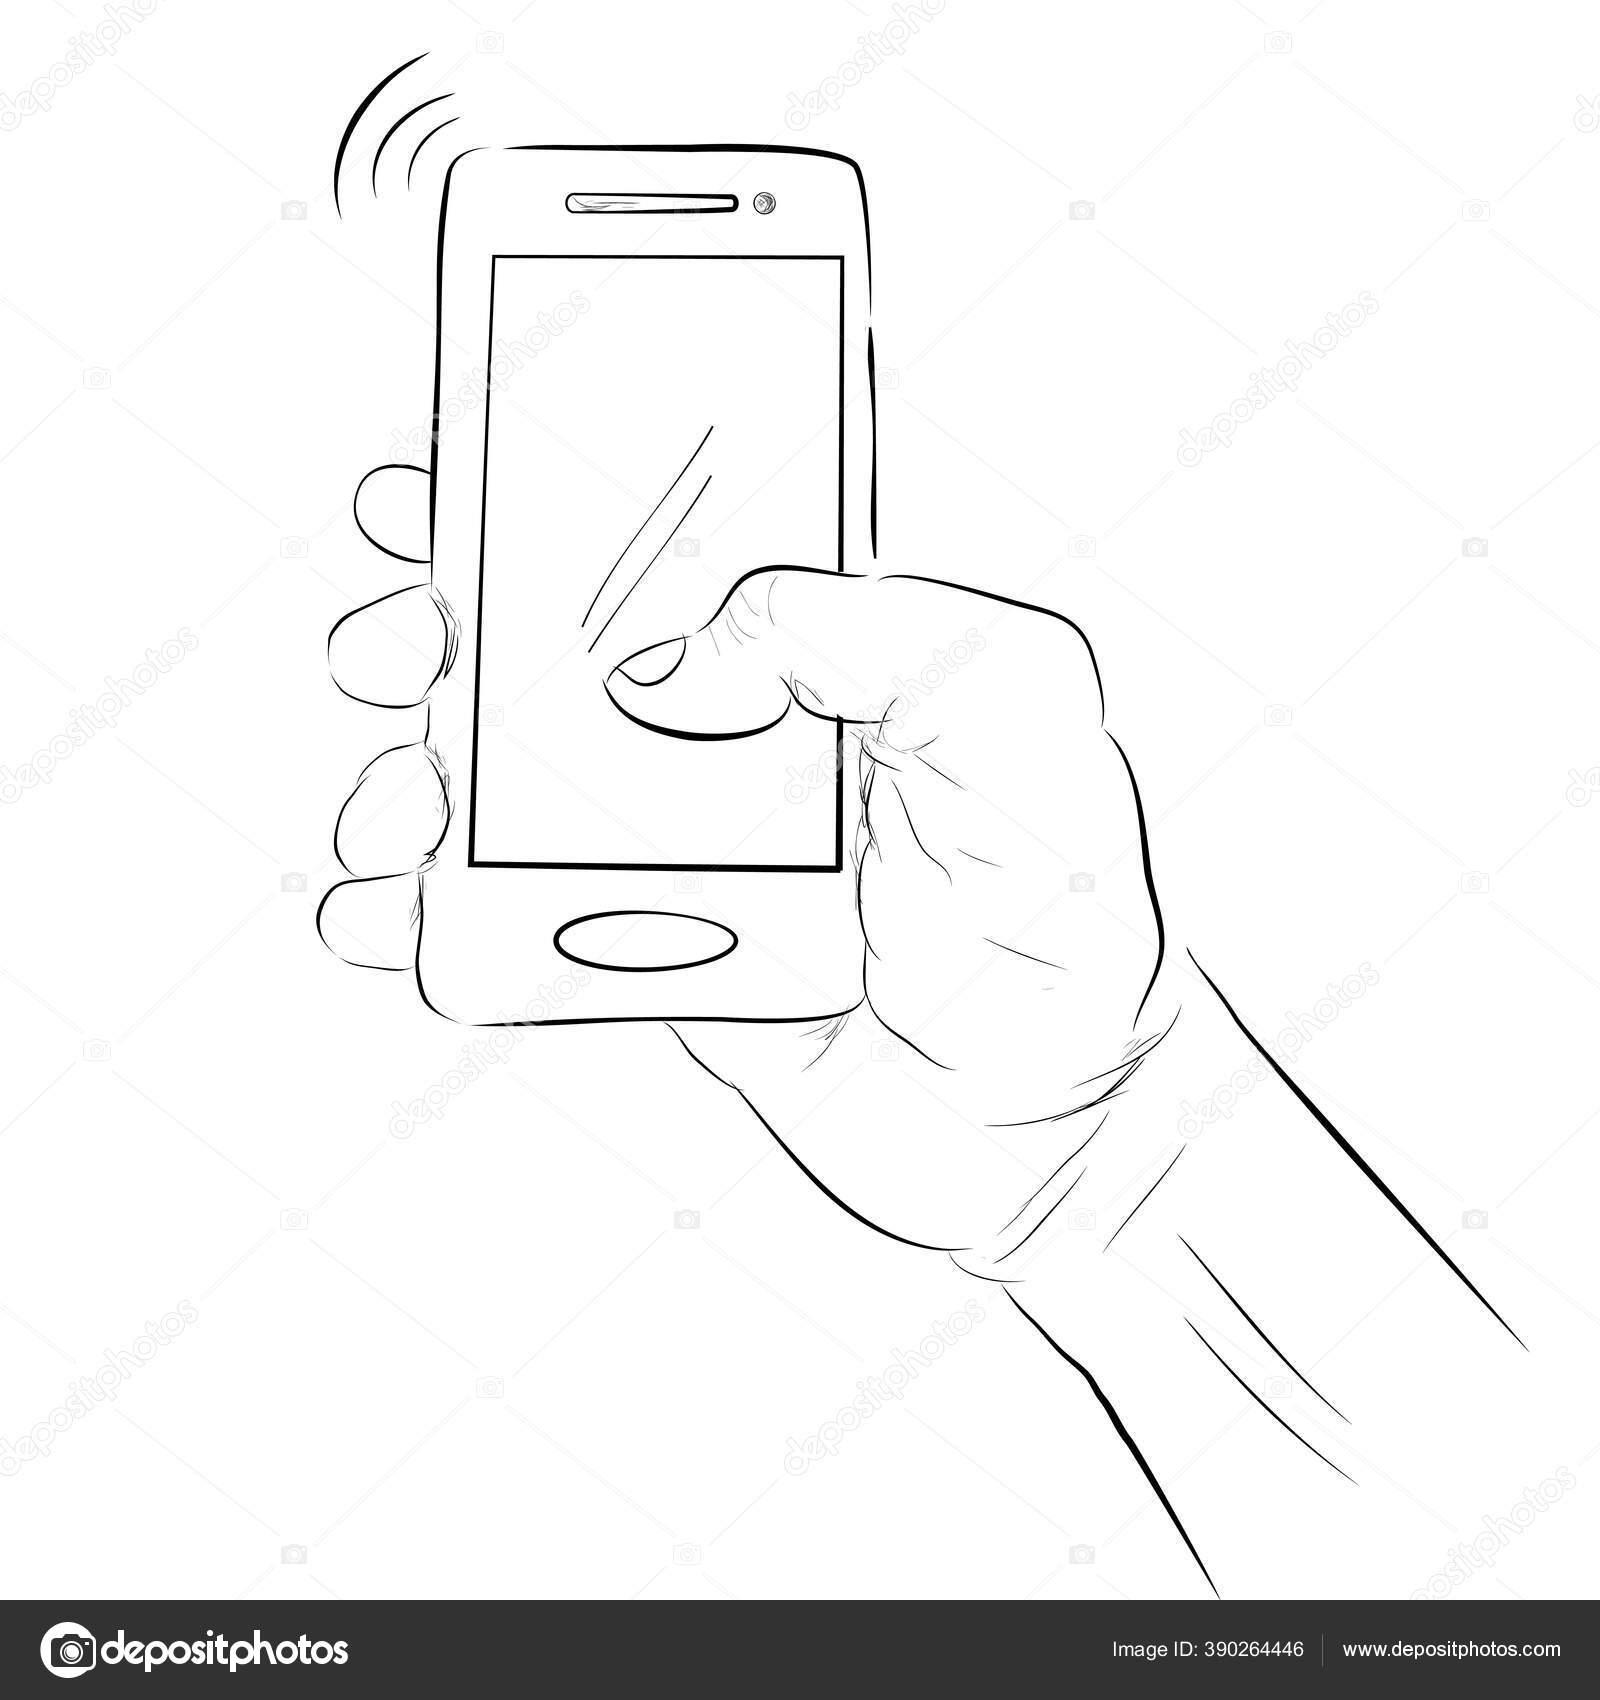 How to Draw a Hand Holding a Cell Phone  iPhone in Easy Step by Step  Drawing Tutorial  How to Draw Step by Step Drawing Tutorials